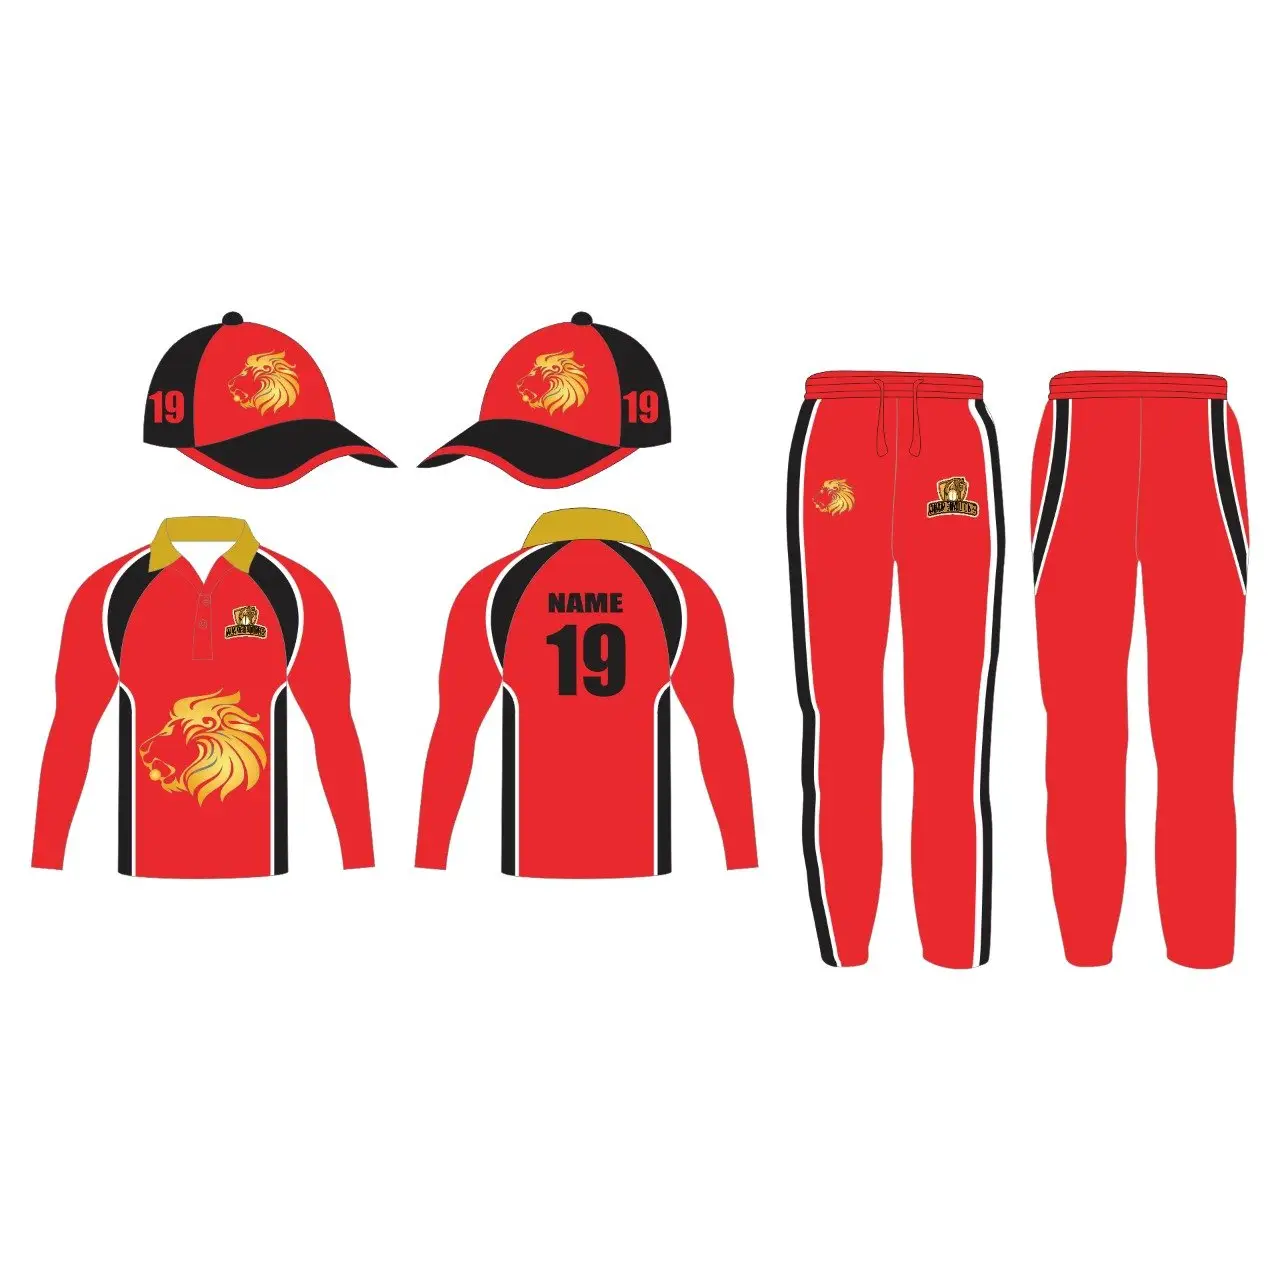 Cricket Uniform Kit Red Color Customized With Name Number Logo - S-XL - Custom Cricket Wear 3PC Full